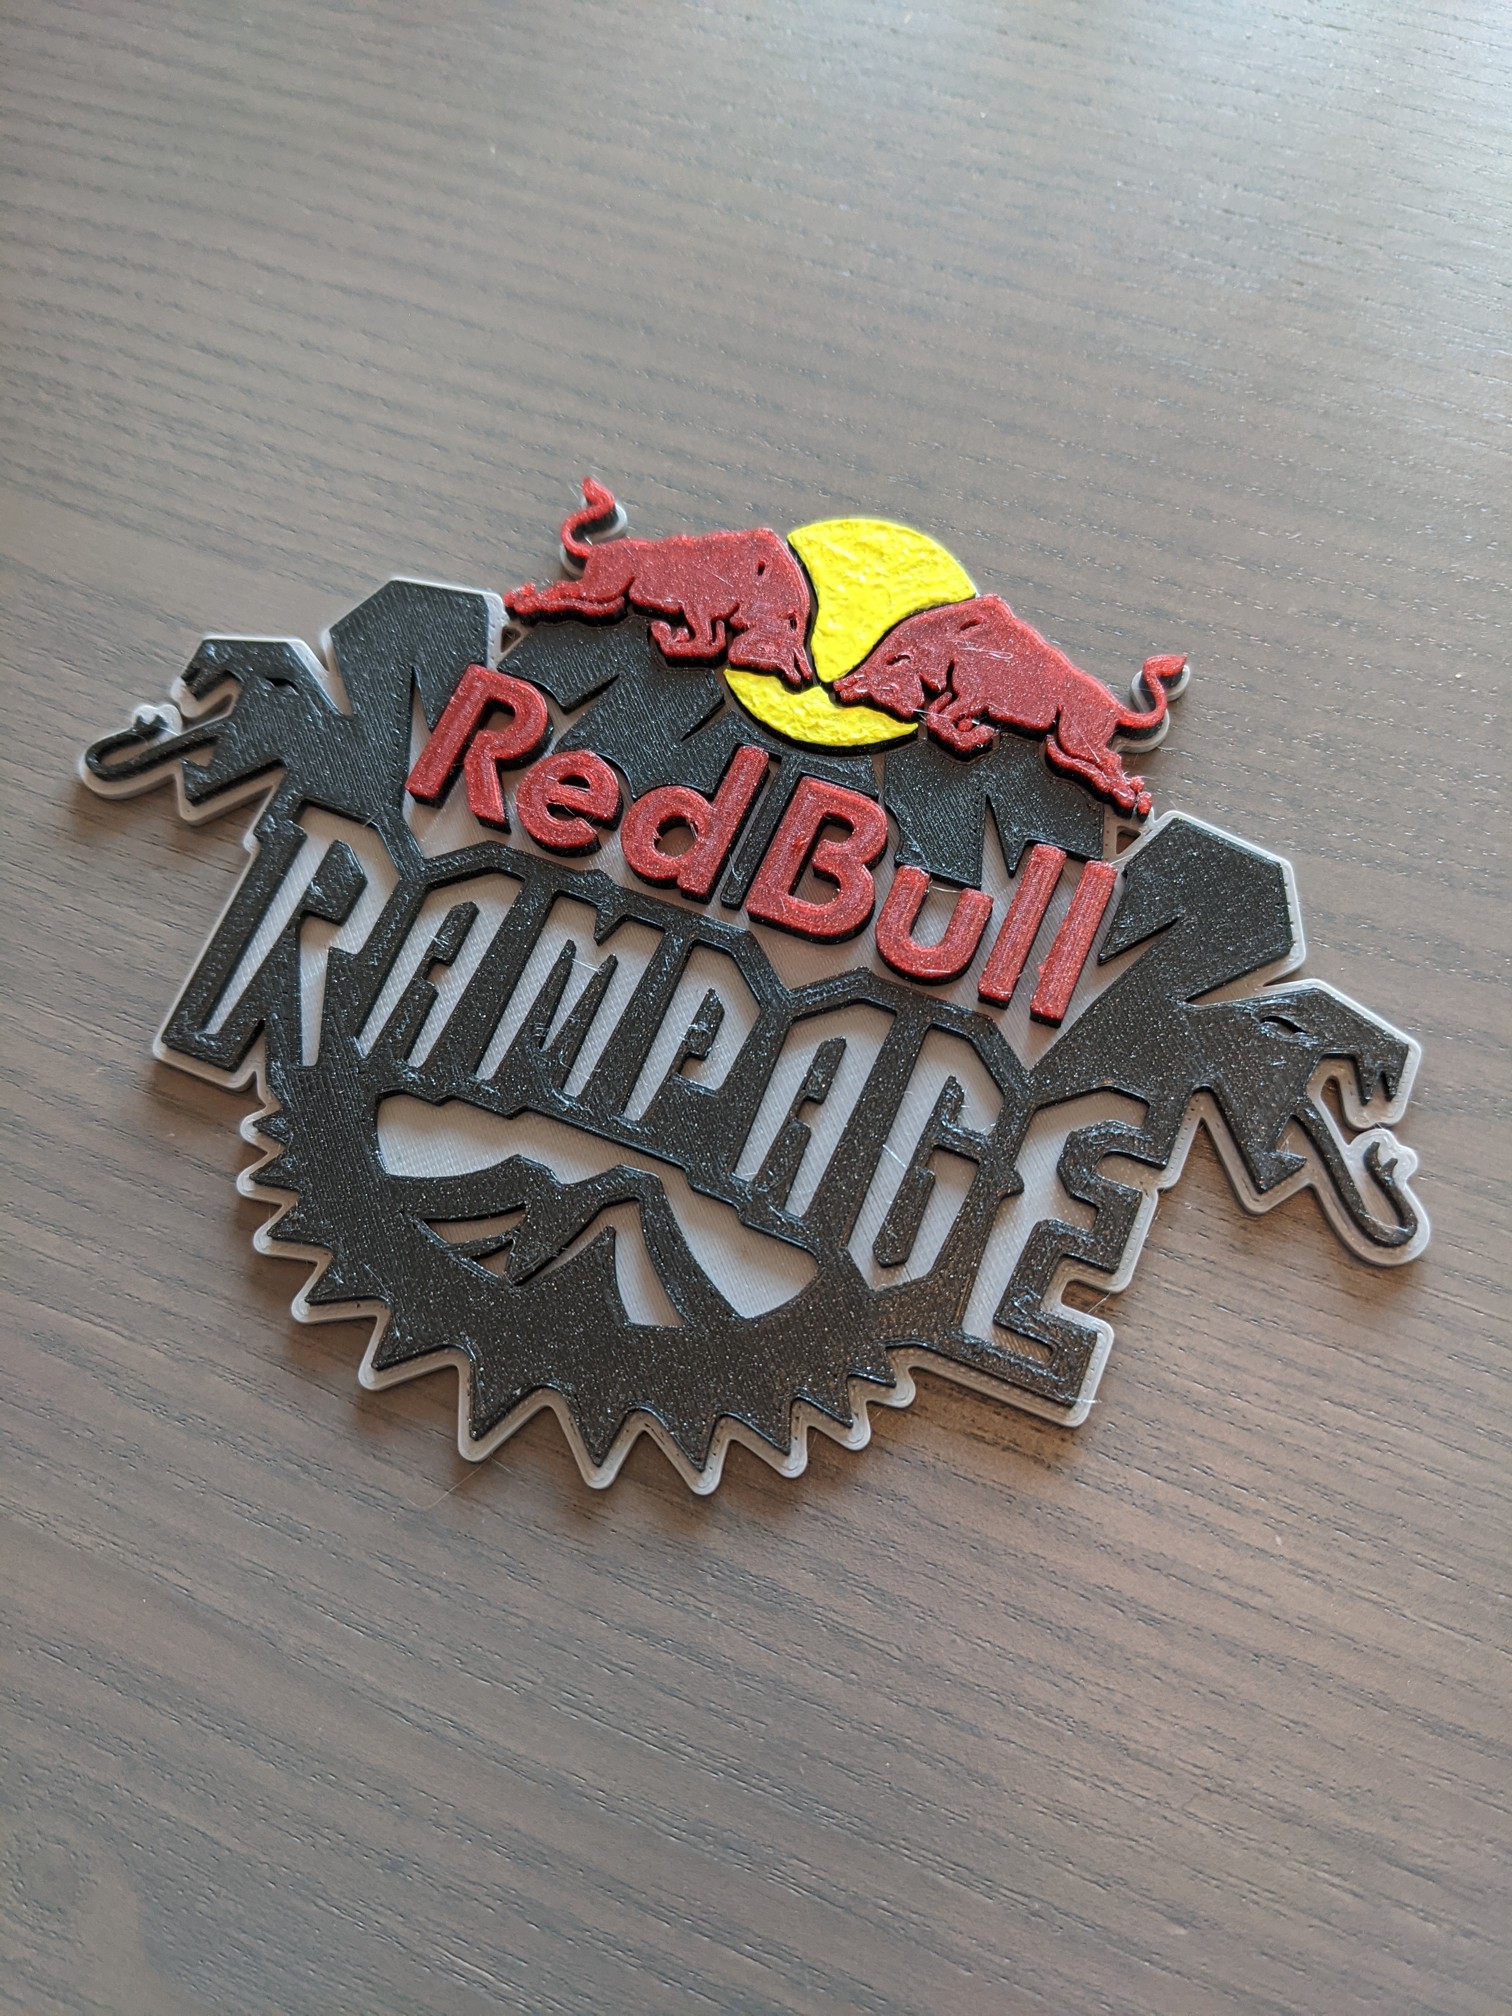 Red Bull Rampage Badge